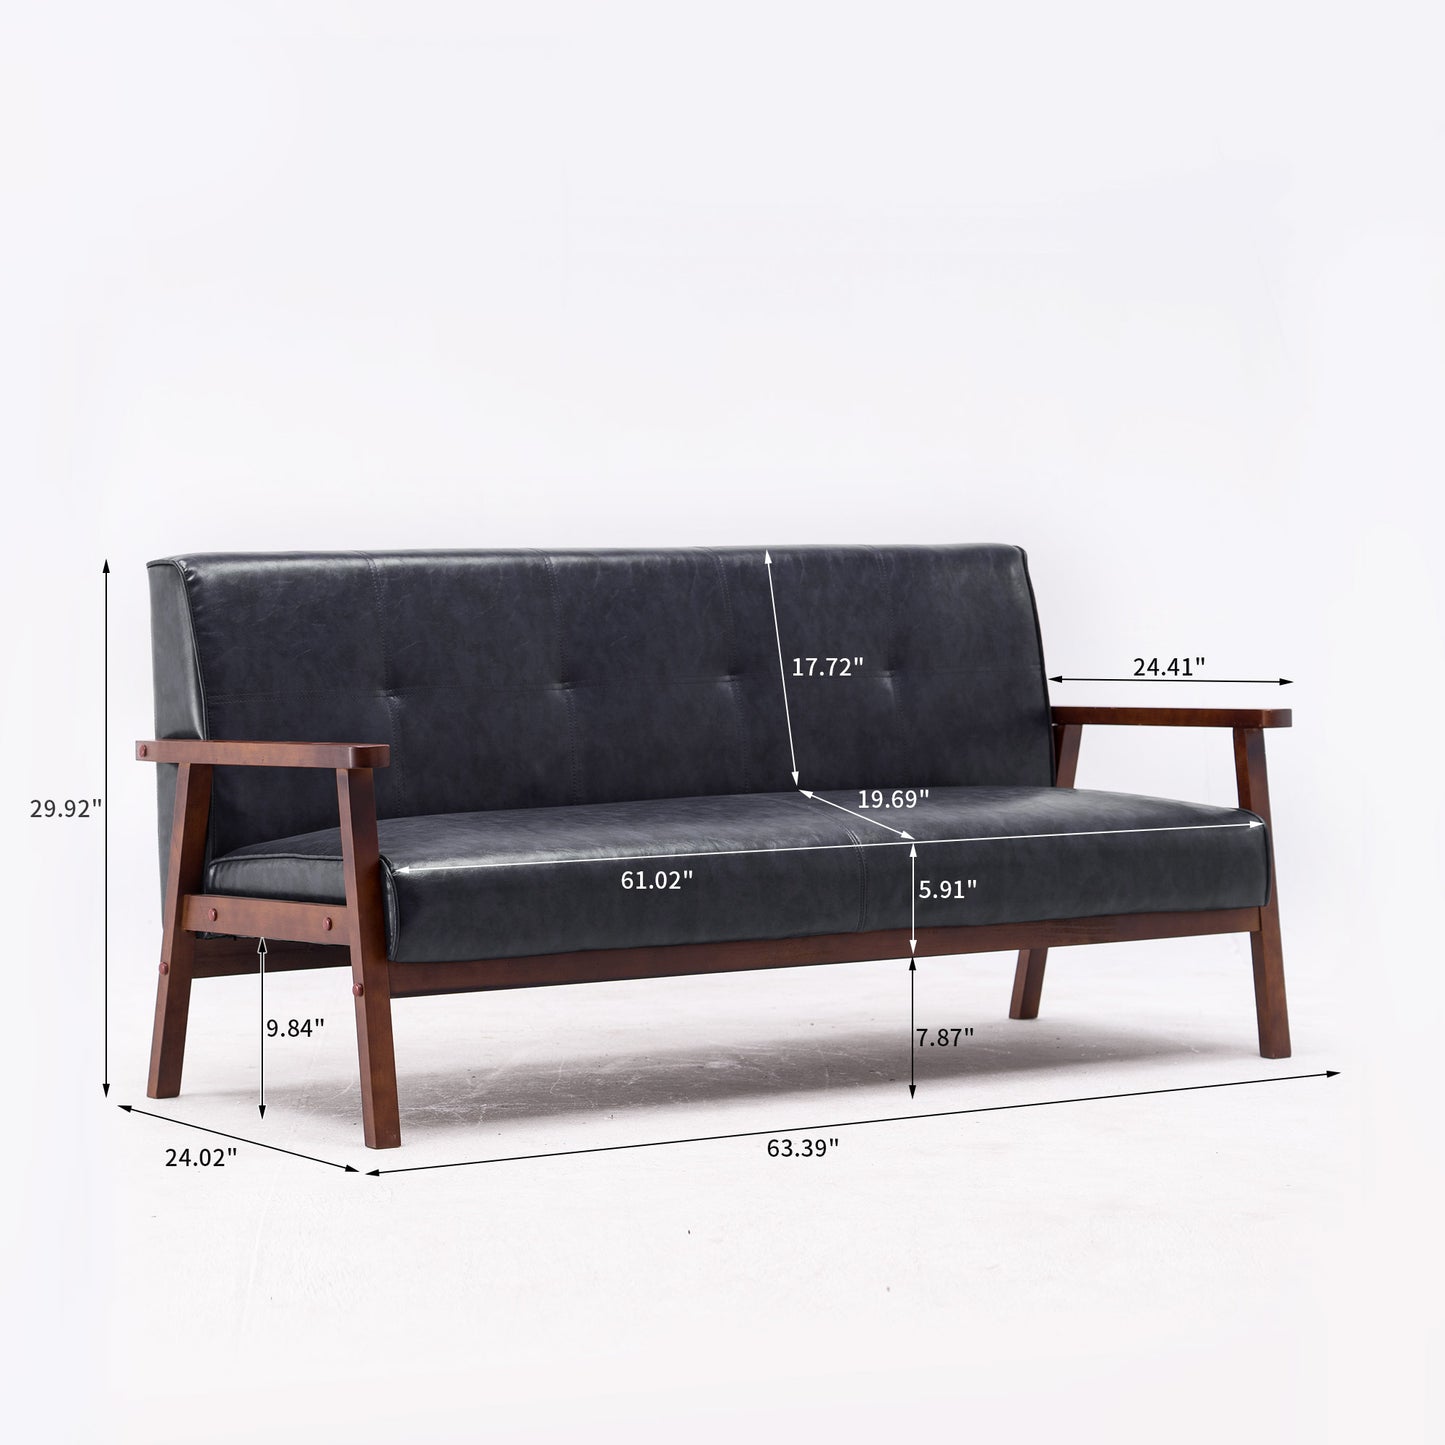 3P SOFA 3-Seater  Home Living Room Wooden arms Black